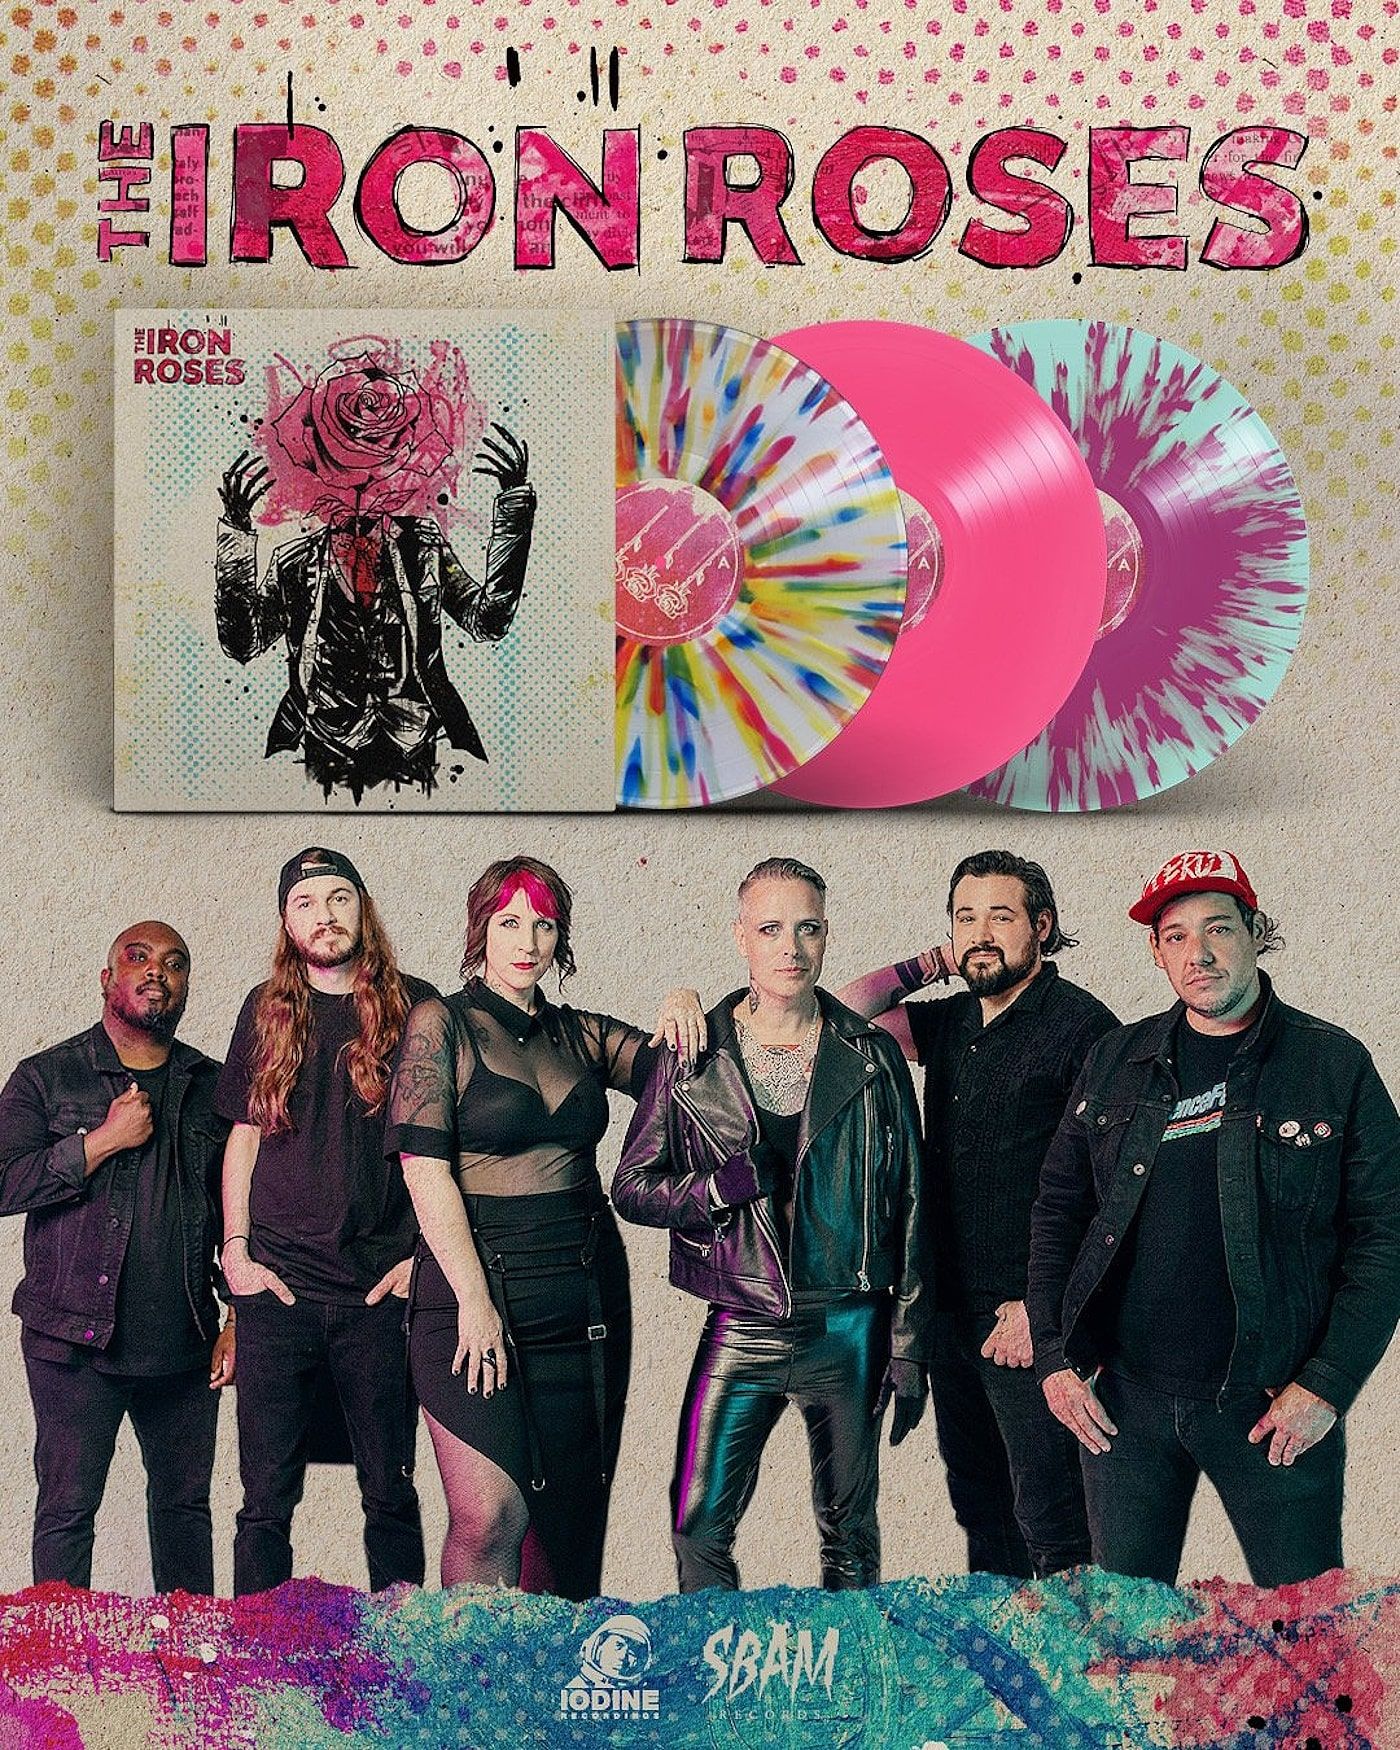 The Iron Roses 